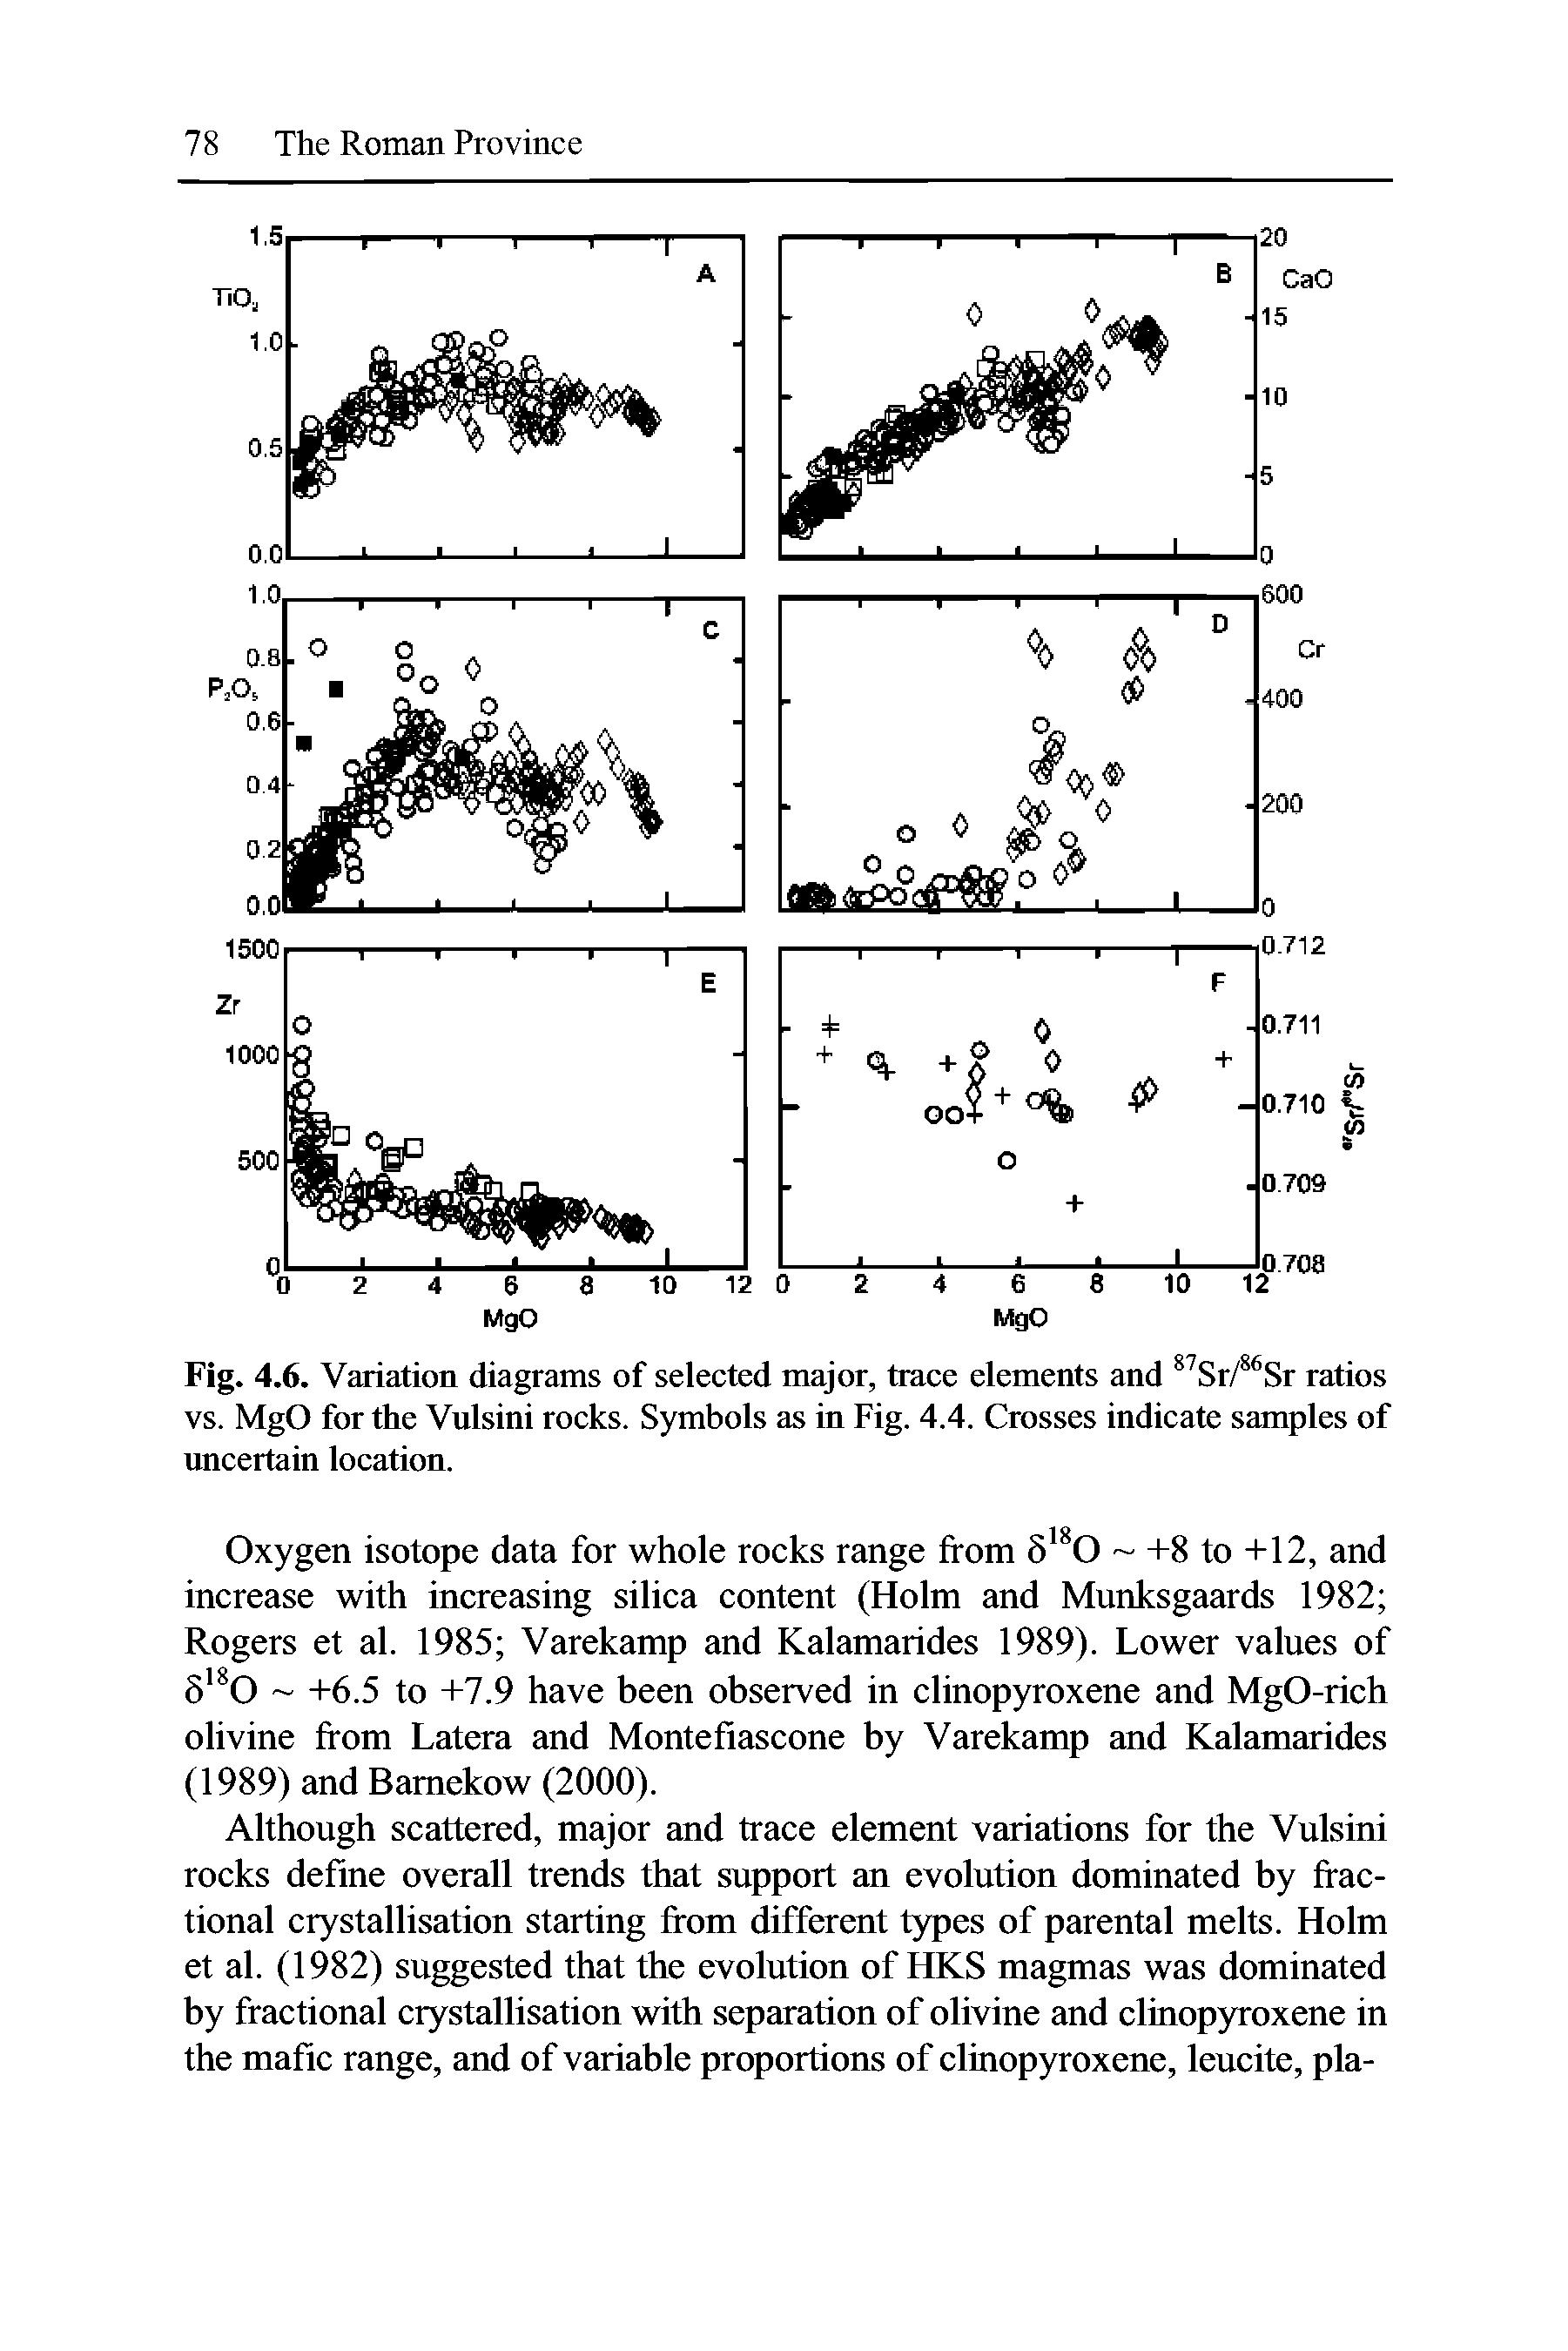 Fig. 4.6. Variation diagrams of selected major, trace elements and 87Sr/86Sr ratios vs. MgO for the Vulsini rocks. Symbols as in Fig. 4.4. Crosses indicate samples of uncertain location.